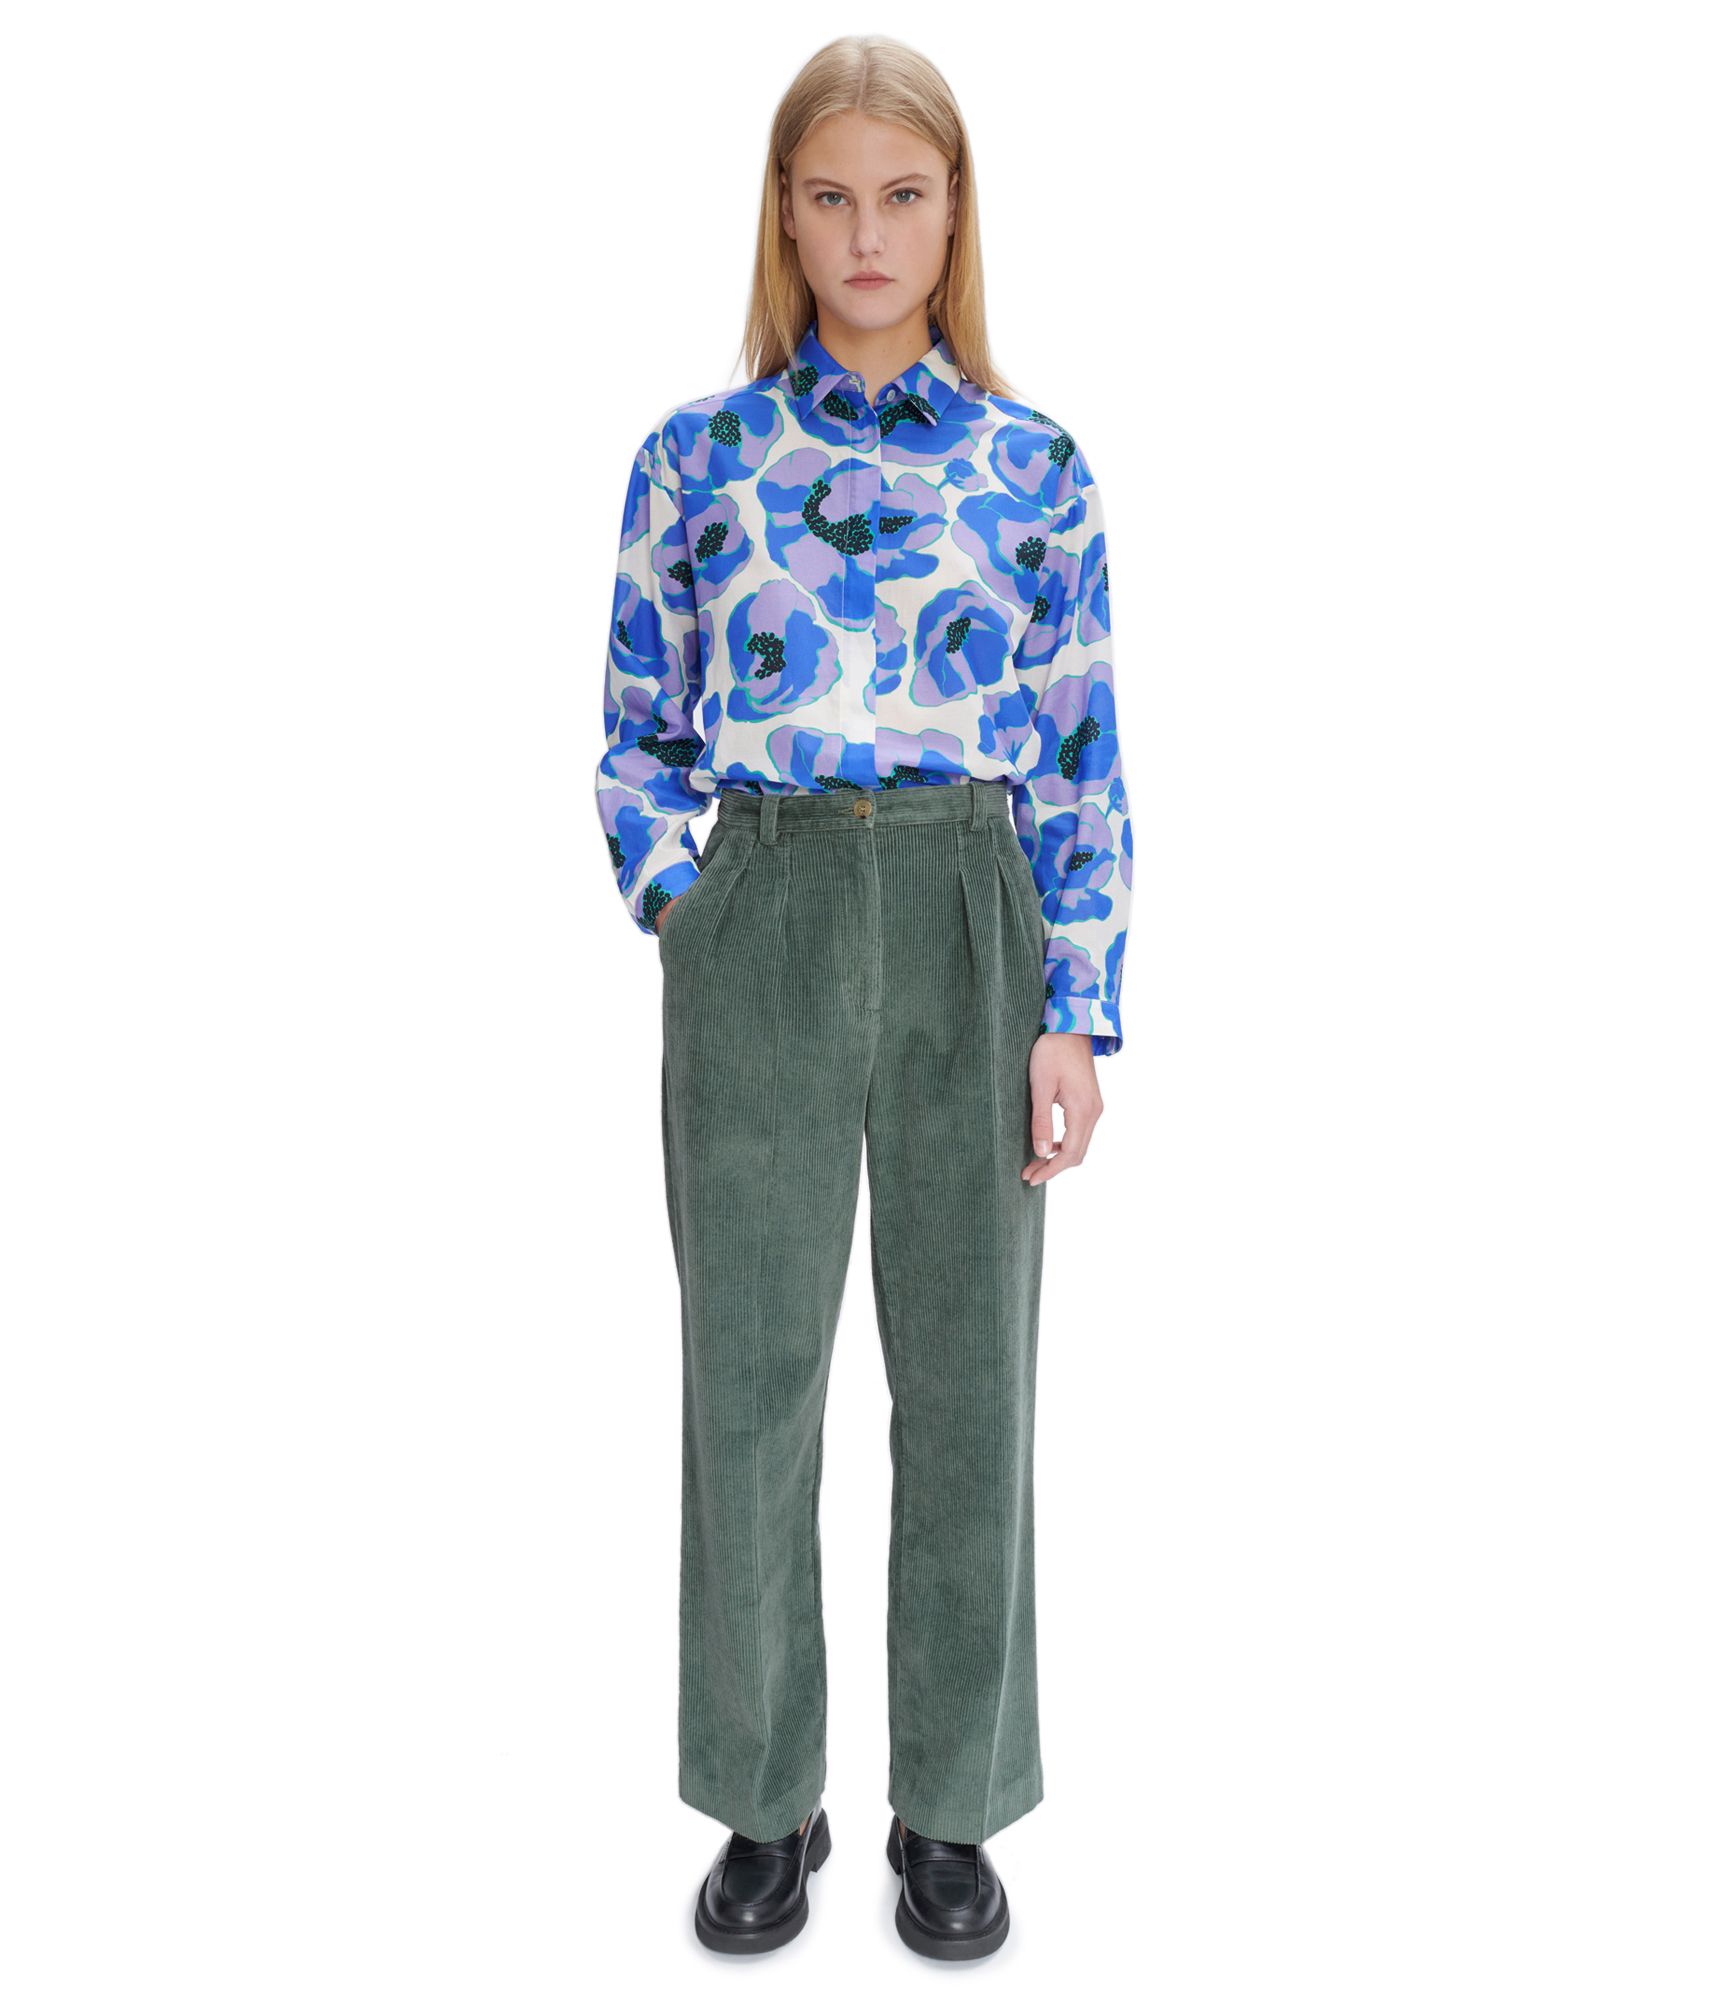 Straight trousers for women, high wasted pants | A.P.C.